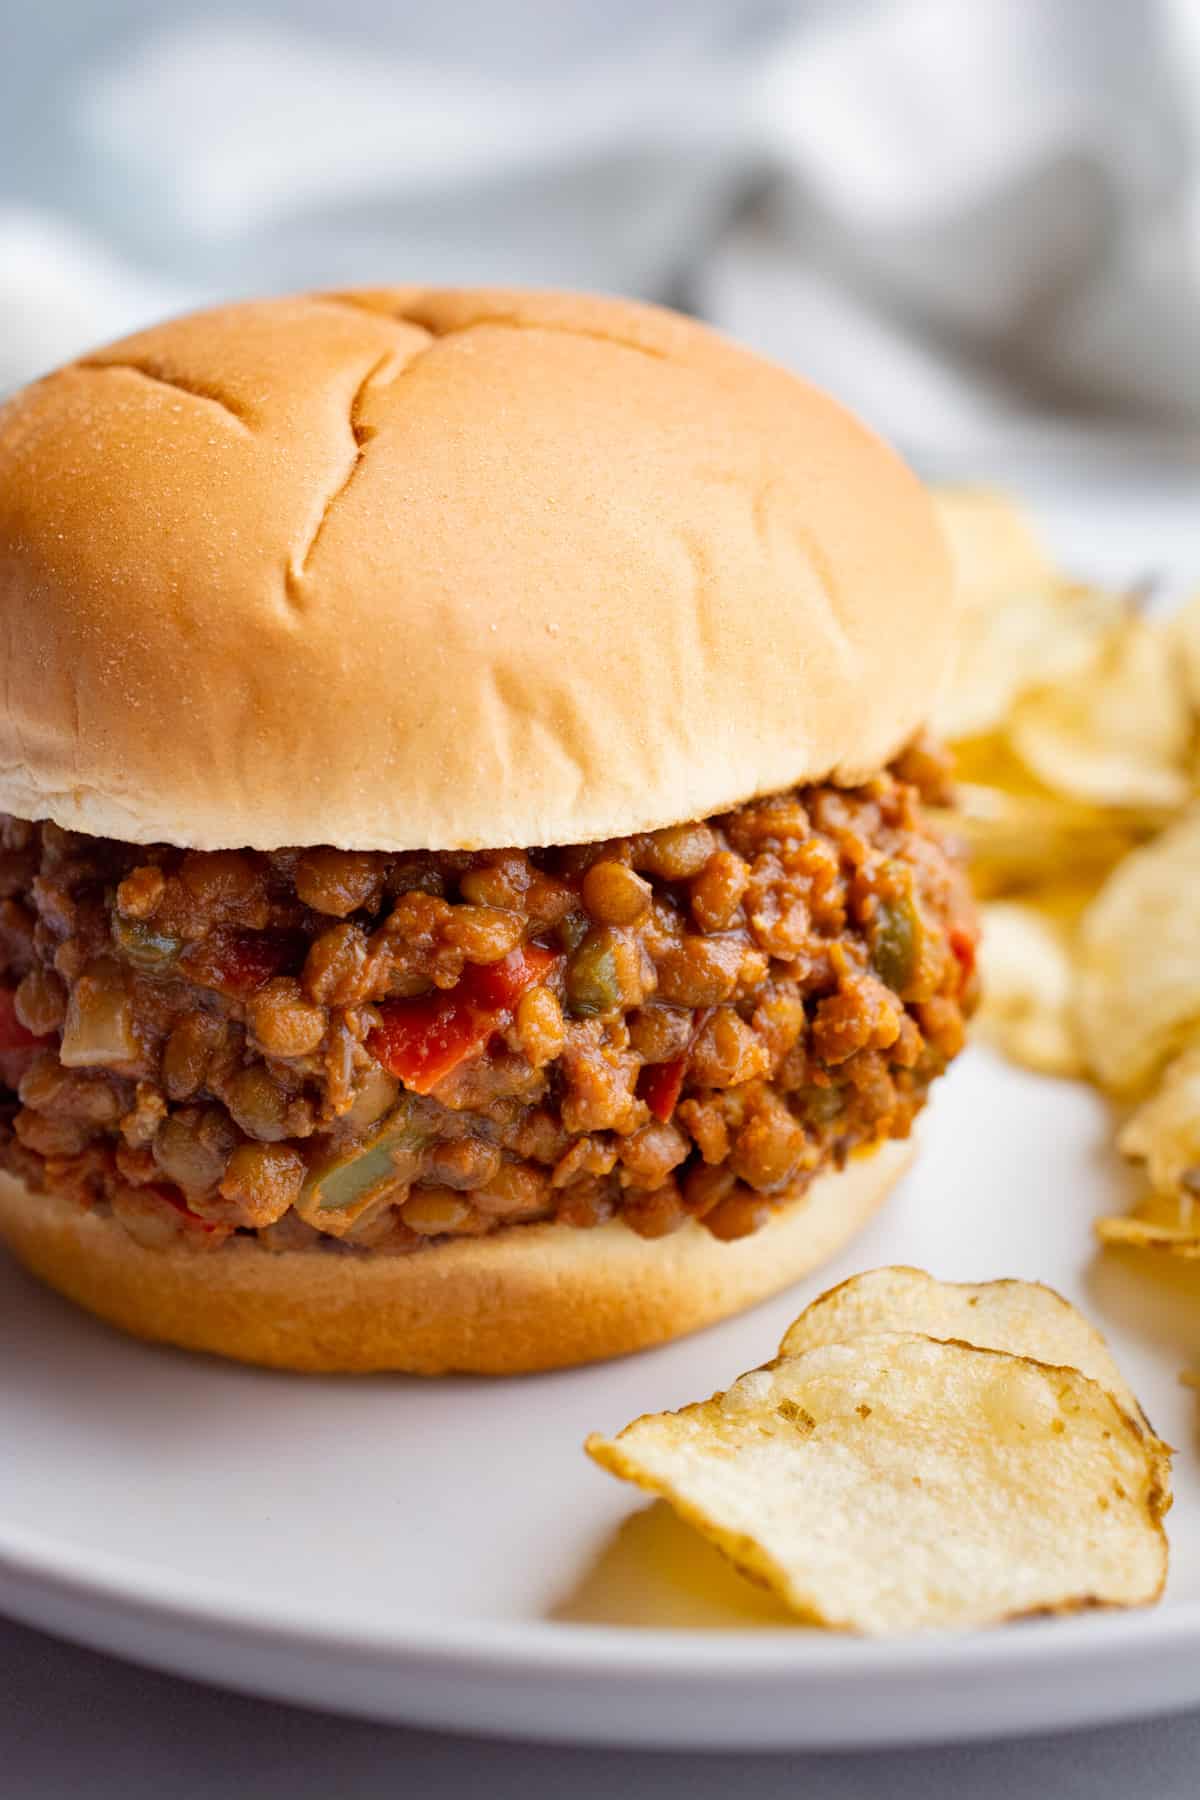 Vegan sloppy joes with lentil "meat" on a white plate.